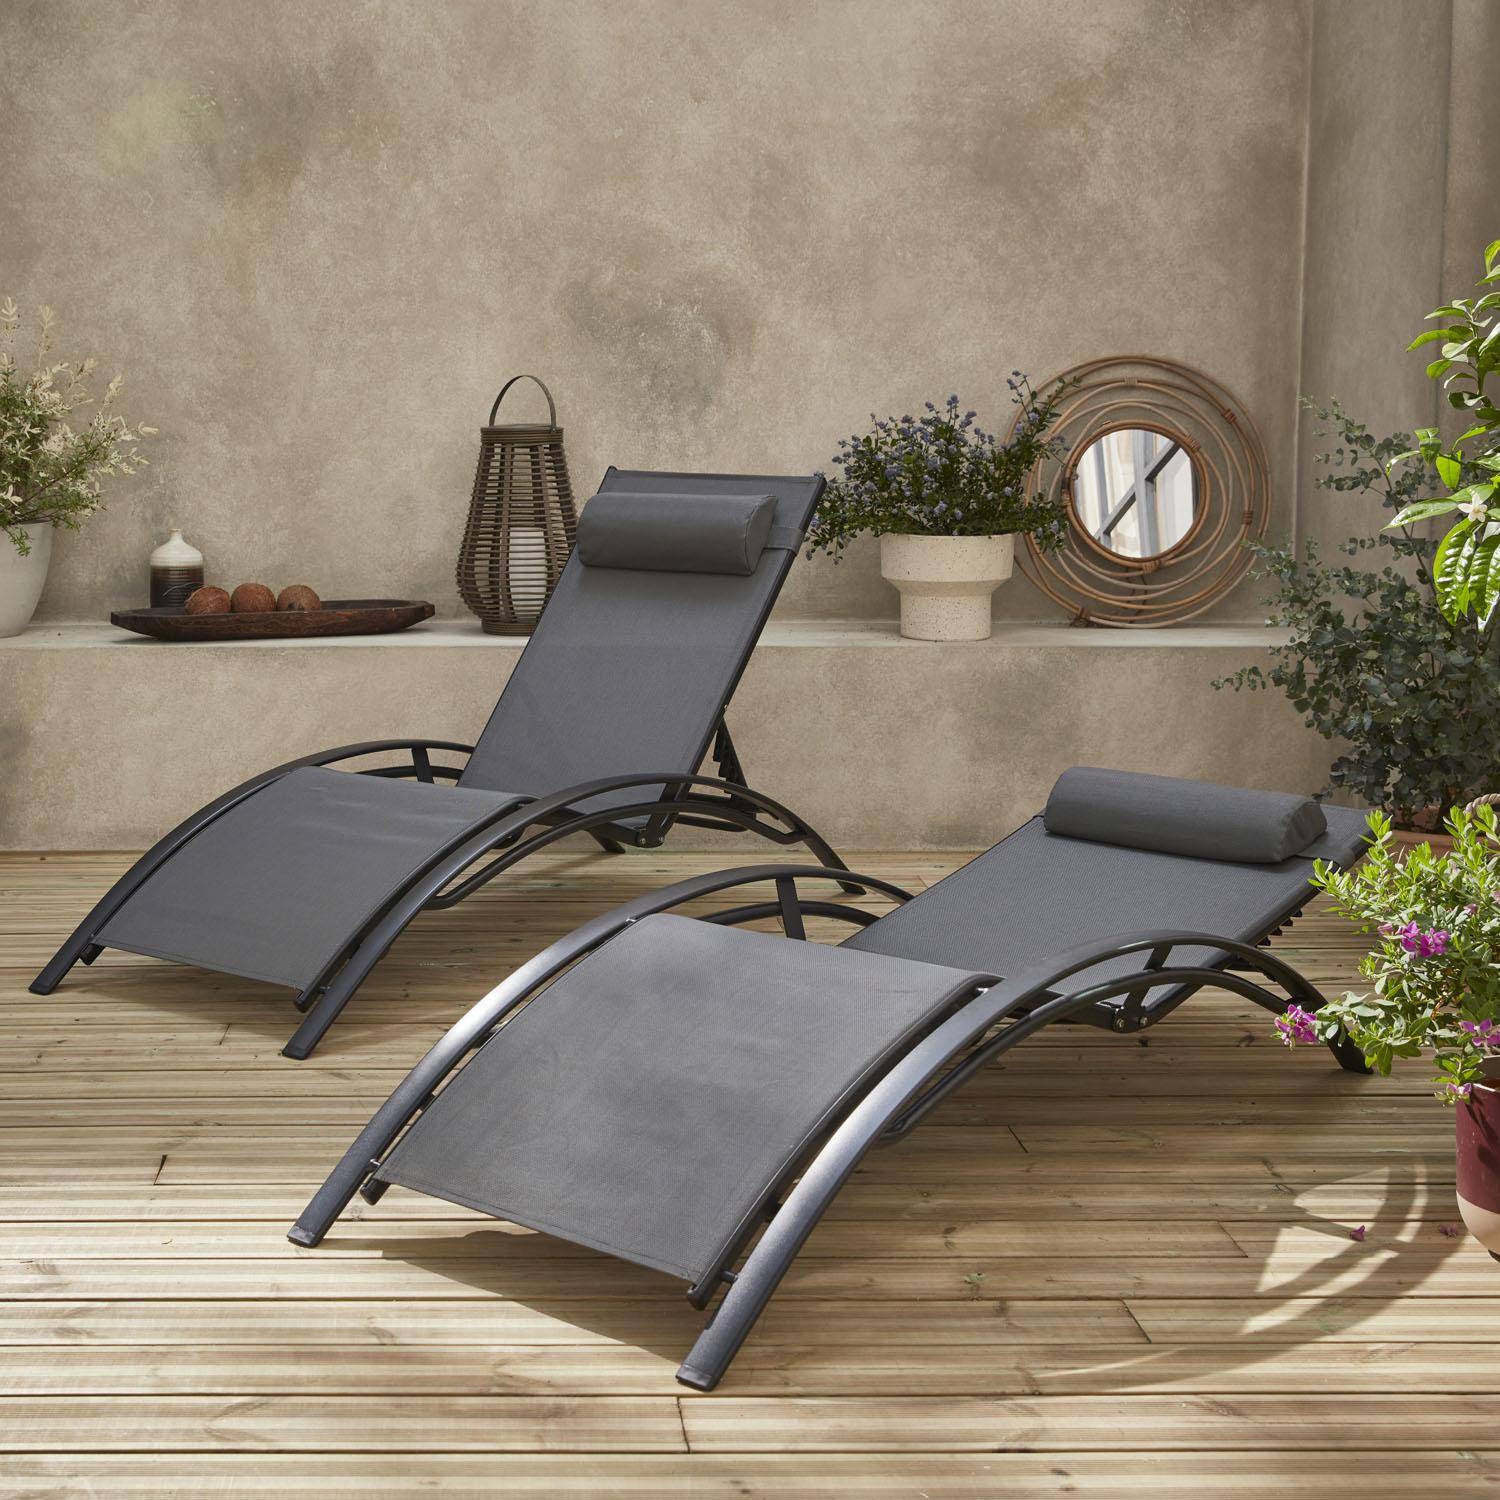 Pair of aluminium and textilene sun loungers, 4 reclining positions, headrest included, stackable - Louisa - Anthracite frame, Grey textilene,sweeek,Photo2